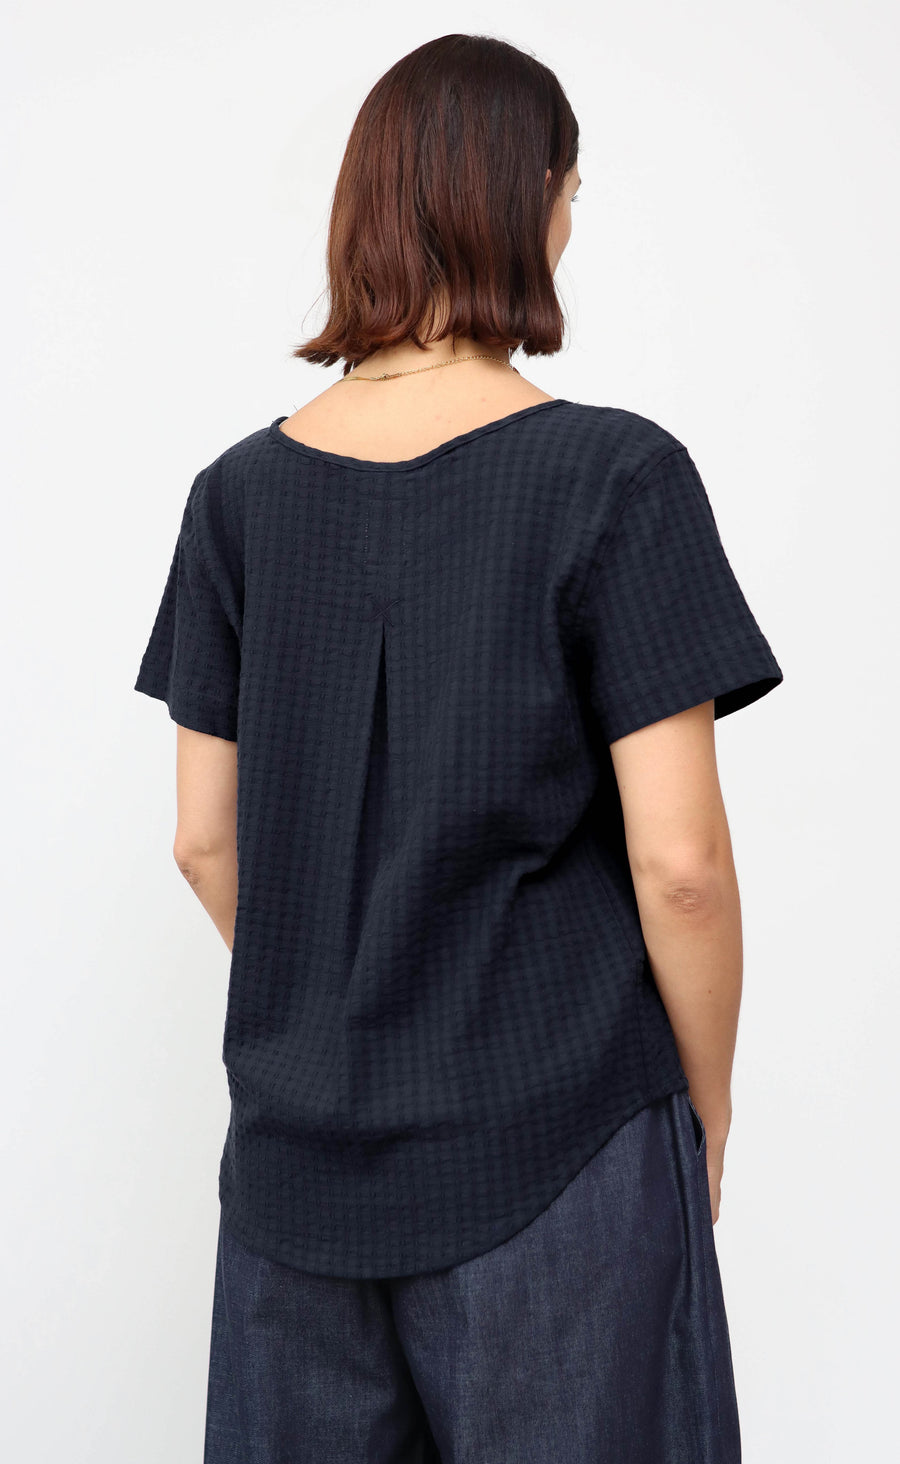 The Darling - Woven Tee